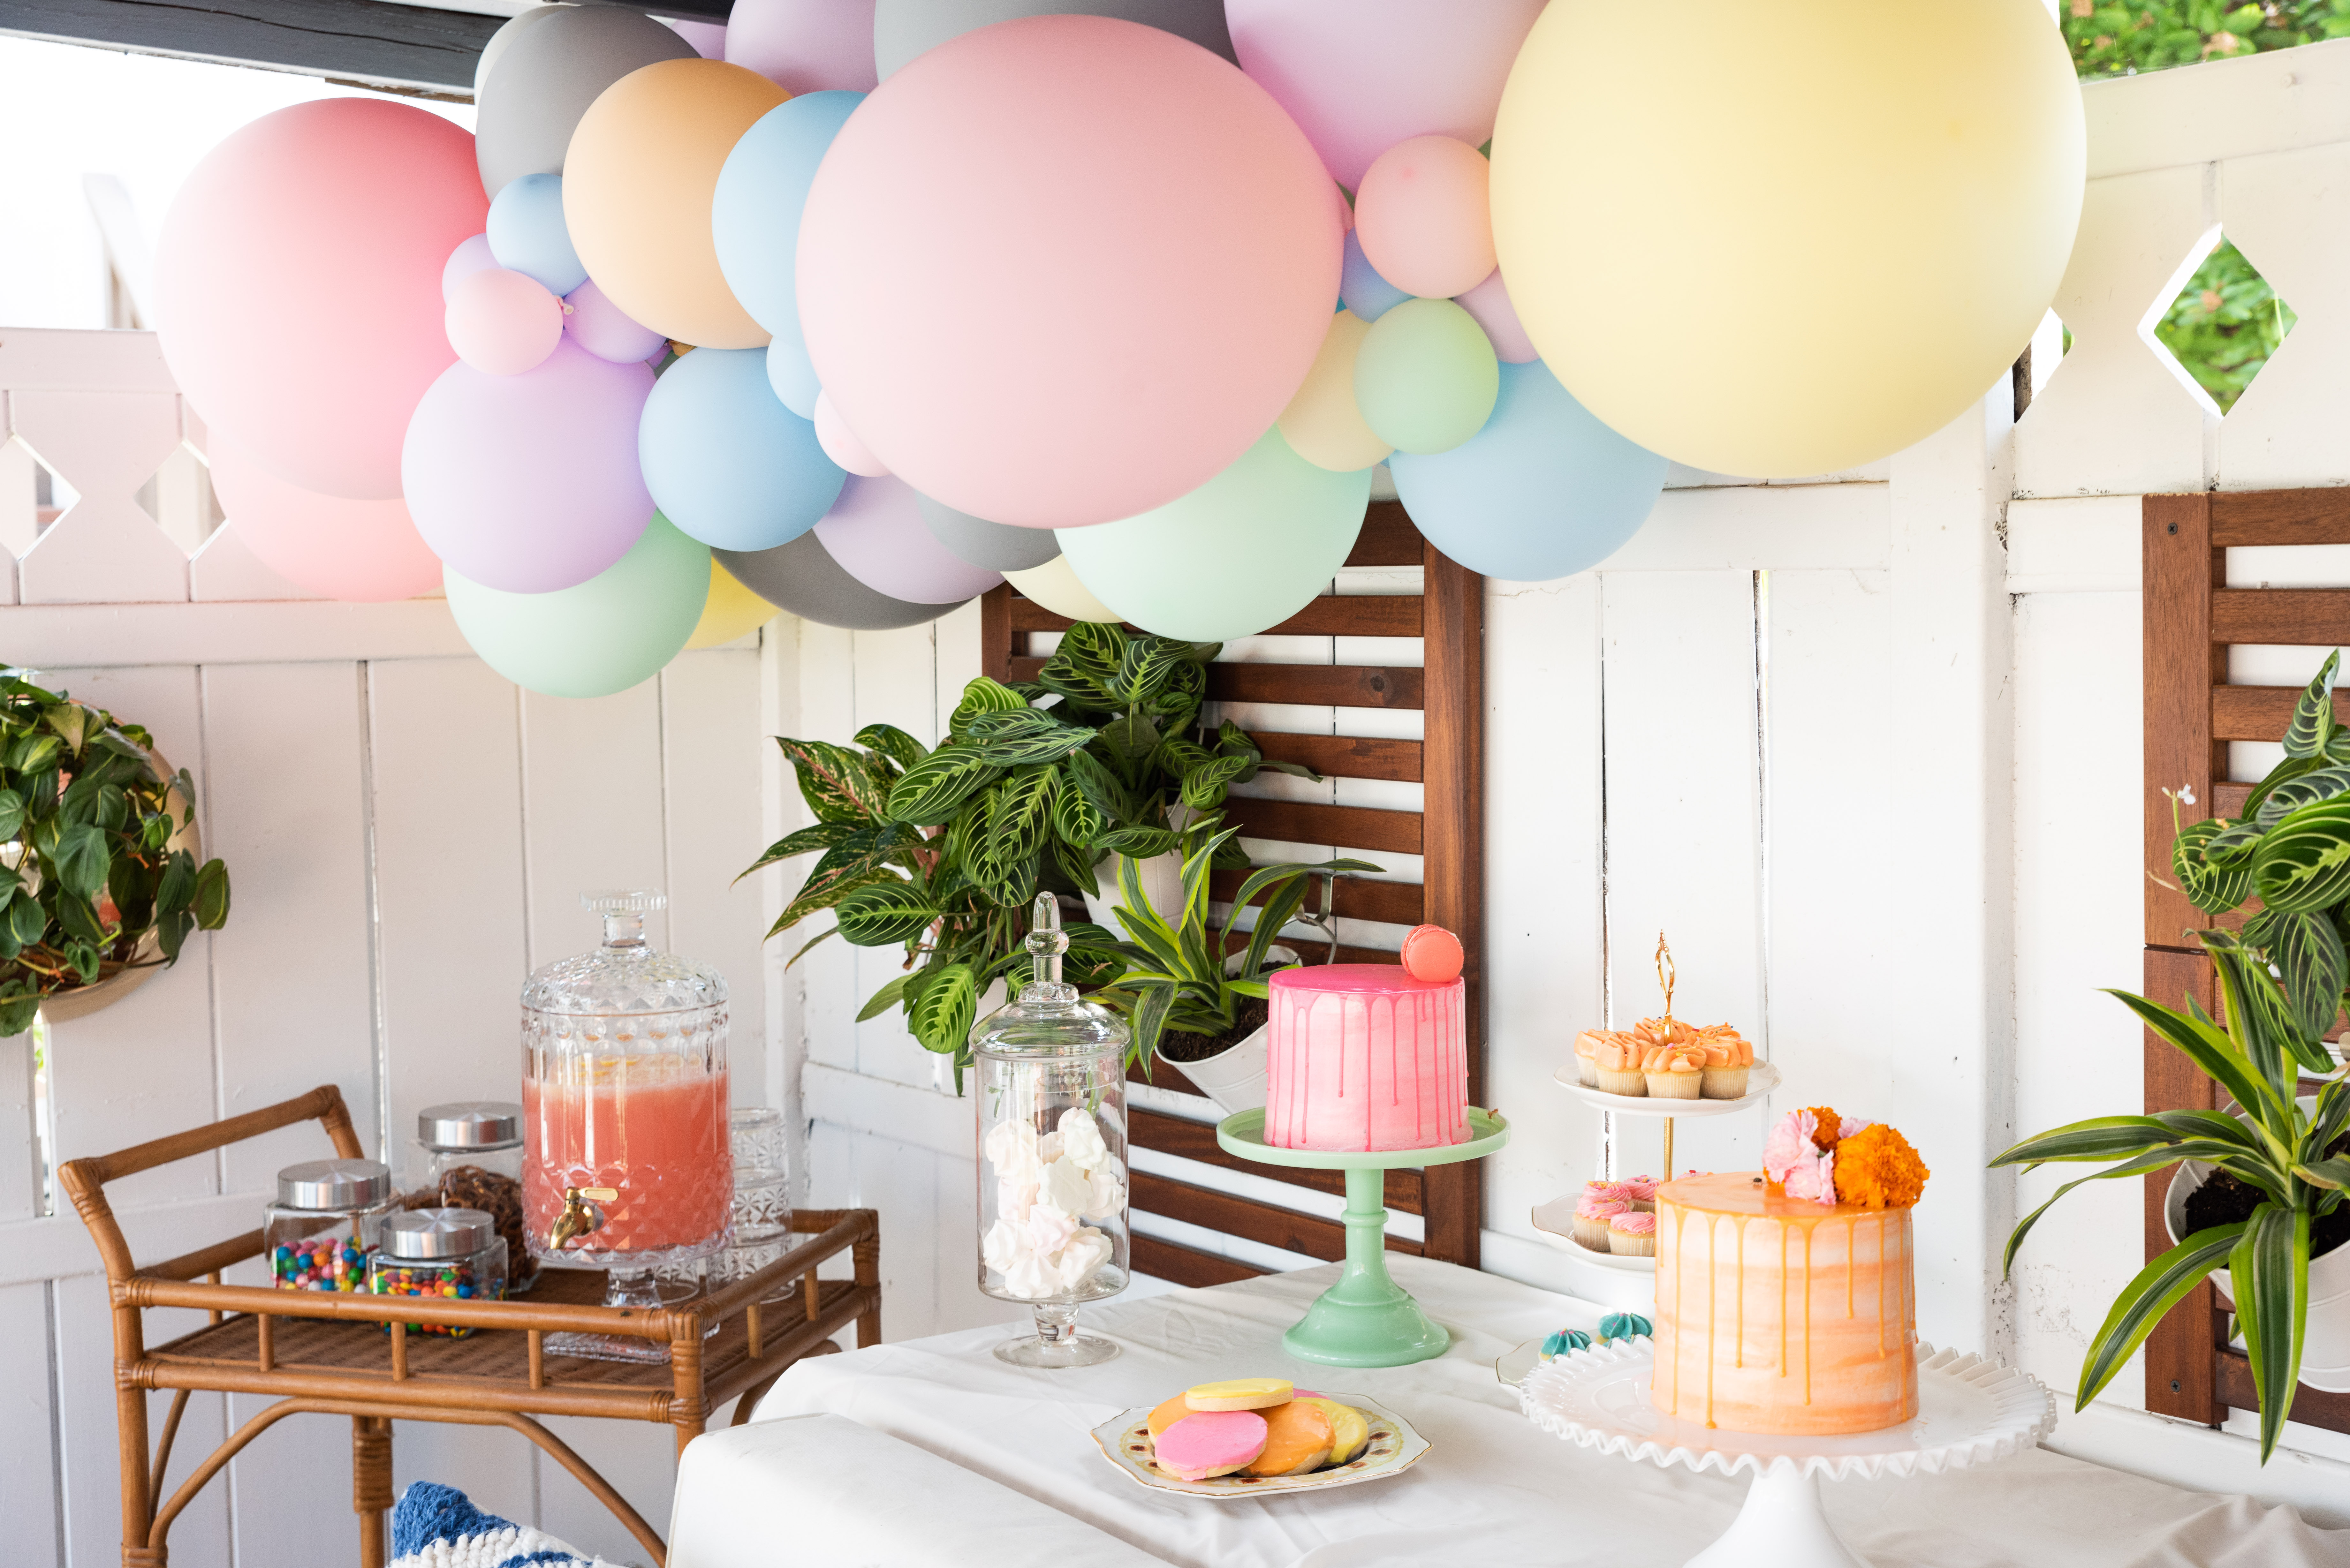 backyard bbq party
pastel party
gray malin party
event designer
fig and whiskey
dessert station
pastel balloons
party inspiration
event designer
party planner